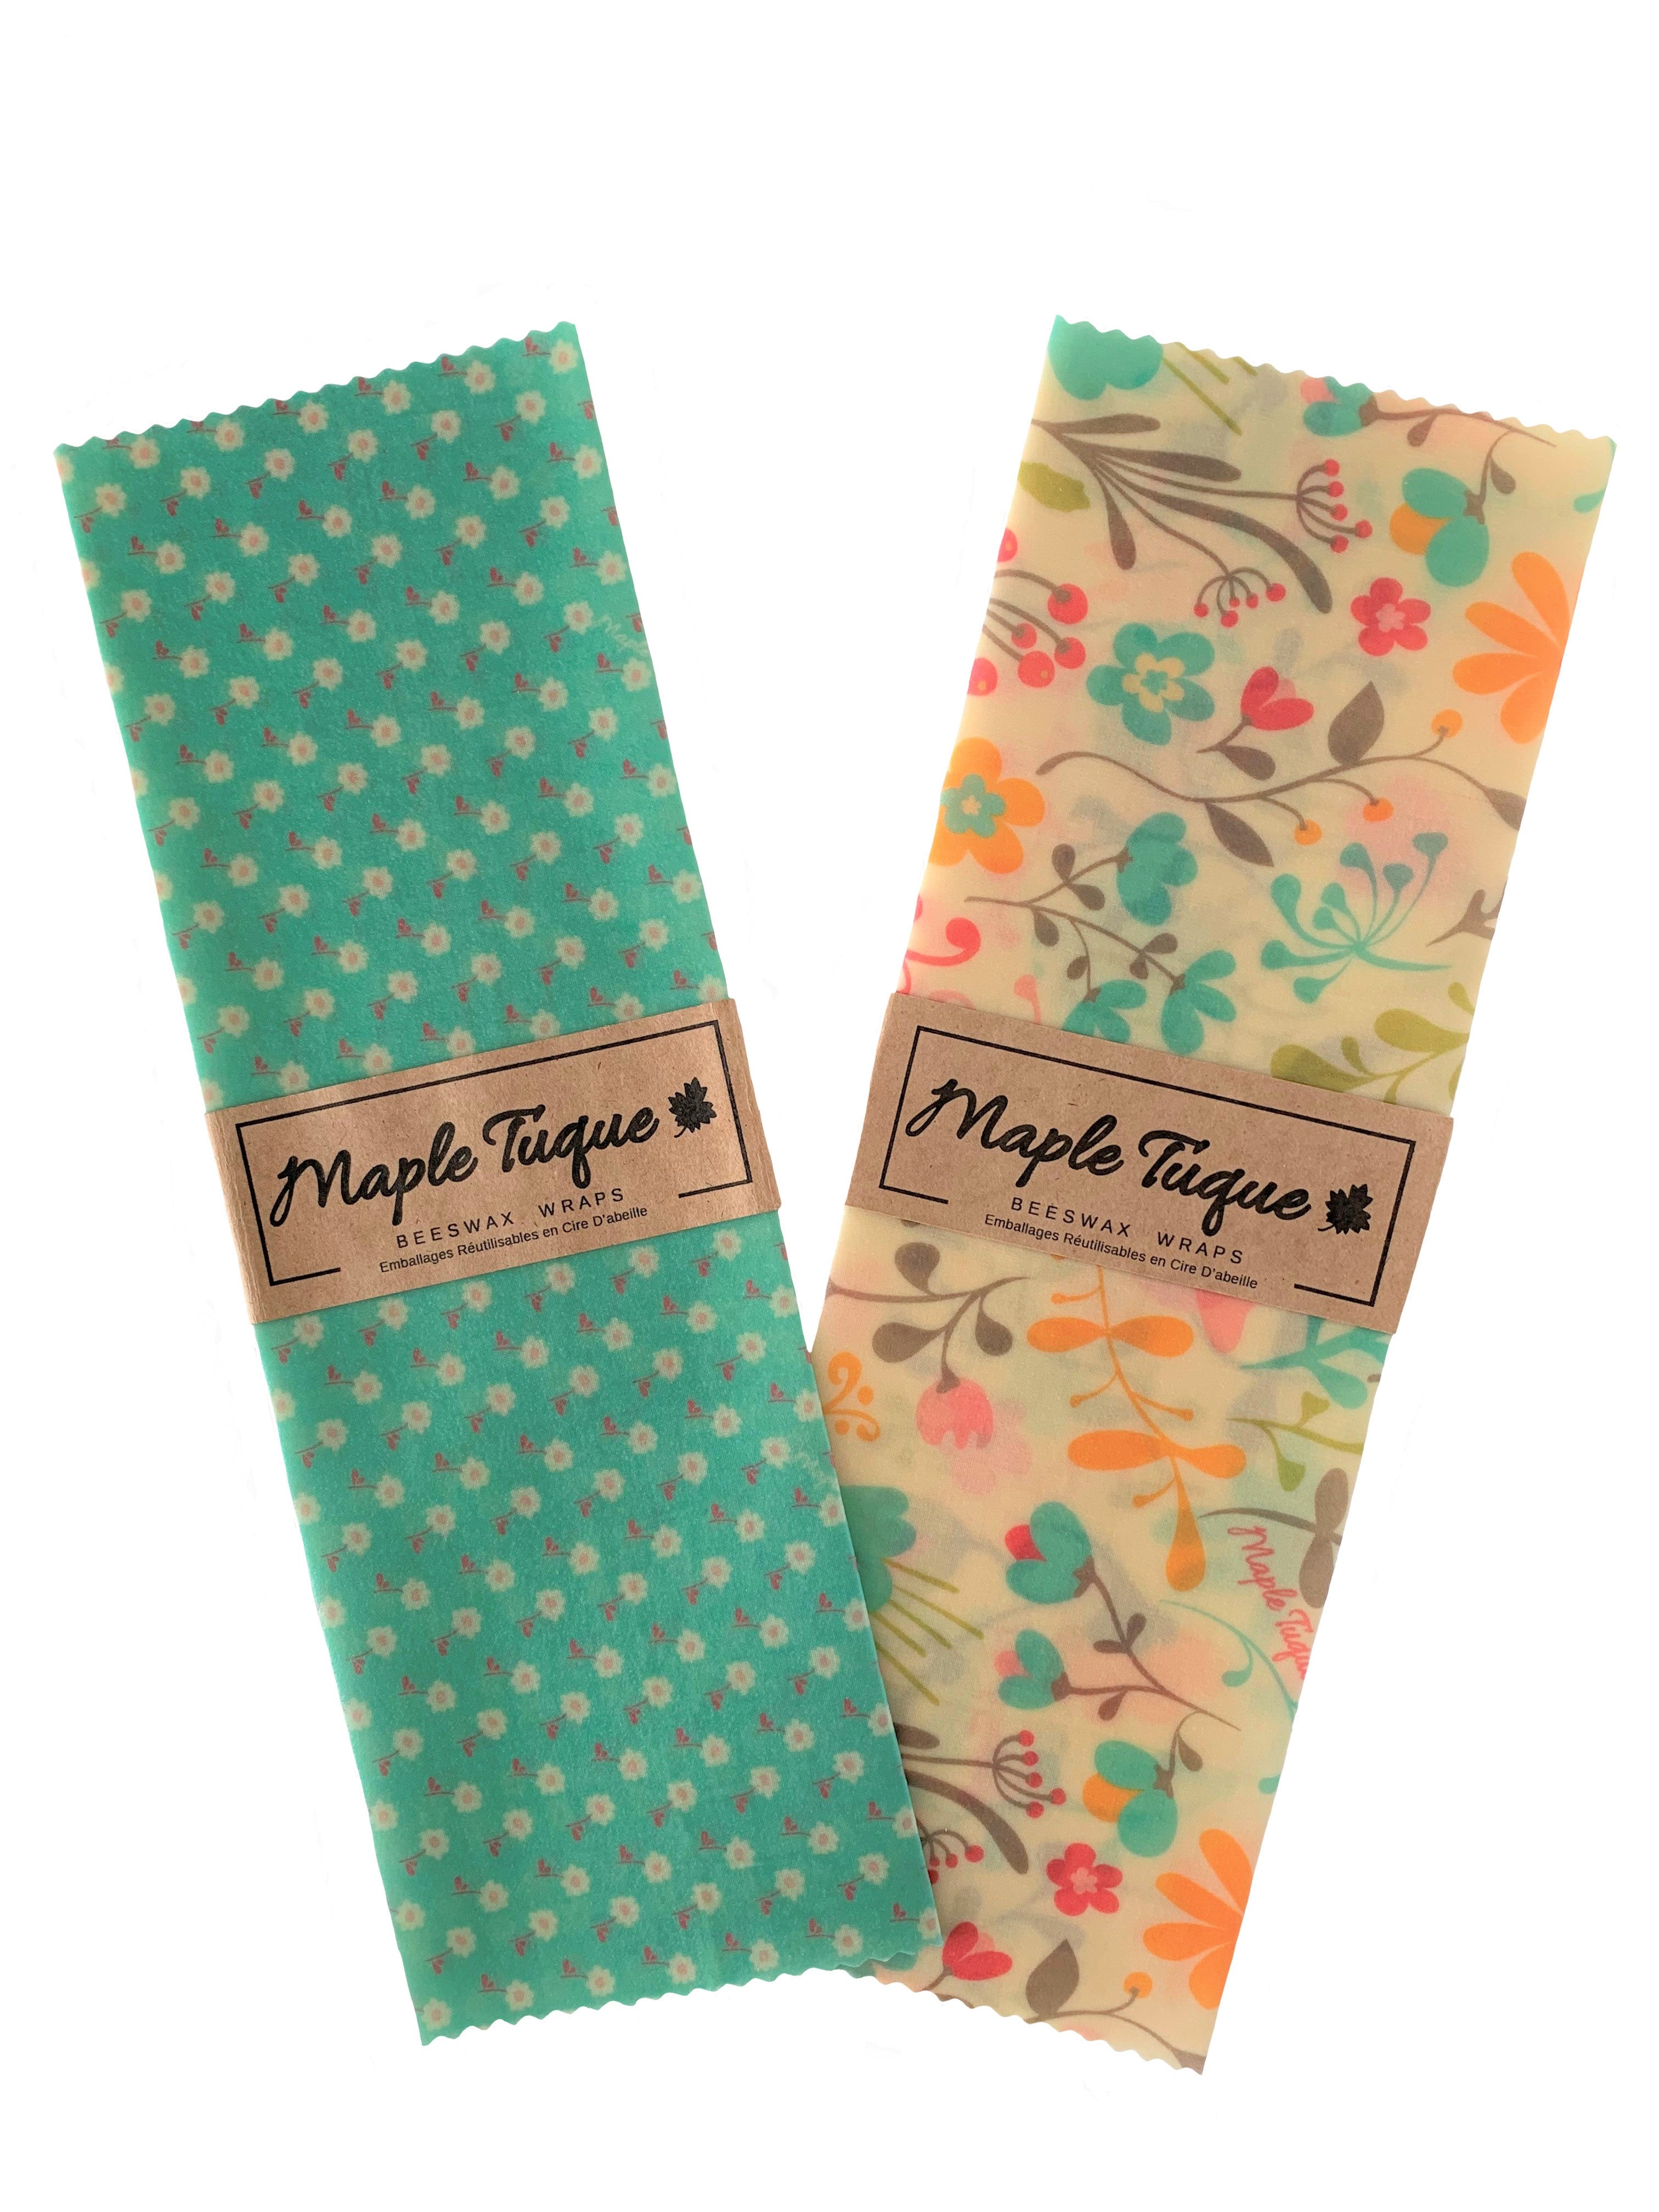 Pack of 2 Large Beeswax Wraps, Size: 15x12" Made in Canada. Pattern: Dream